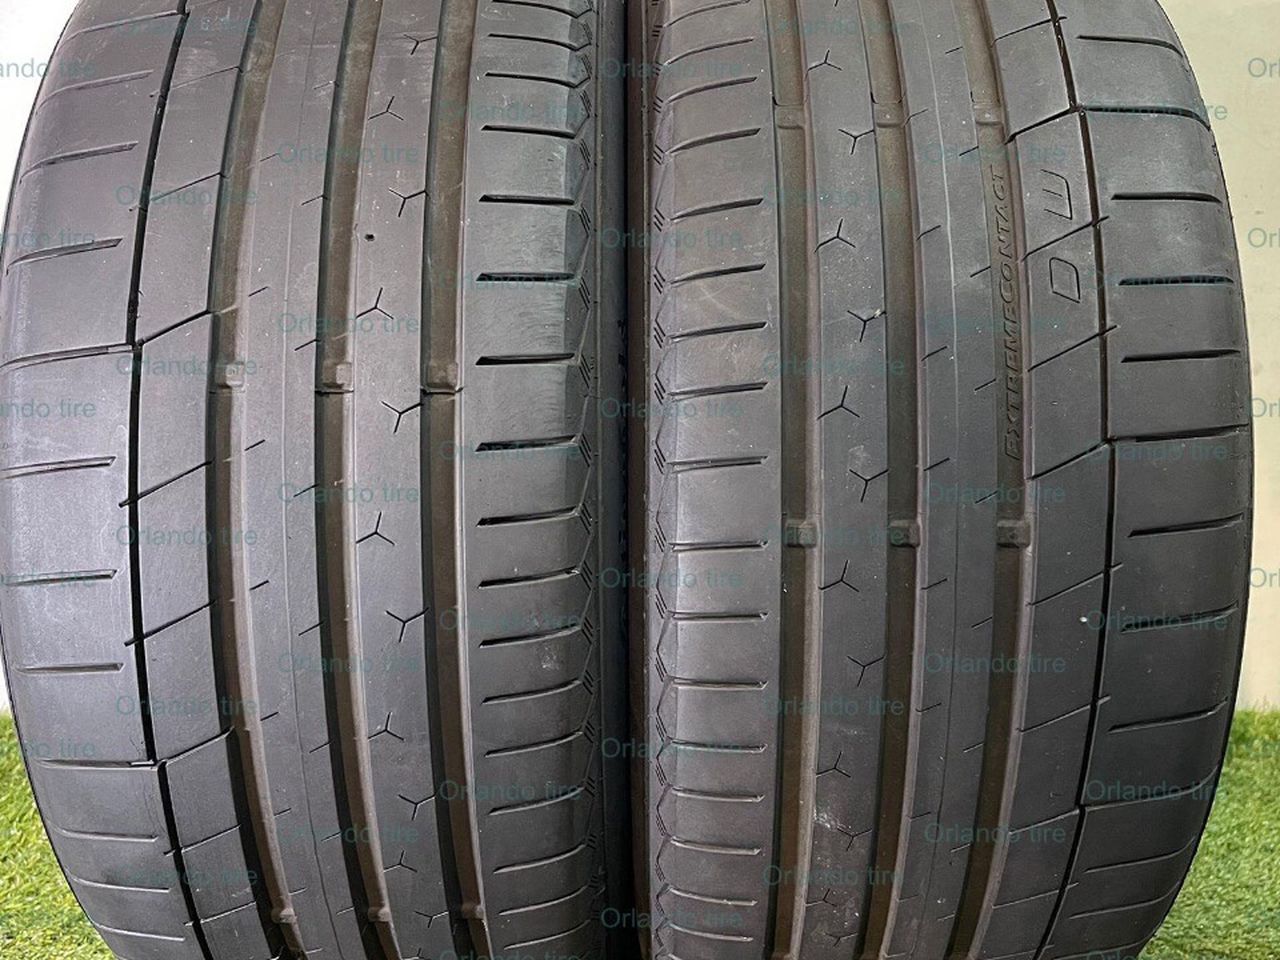 D146  245 40 18 97Y  Continental  ExtremeContact  Sport  2 Used Tires 80% Life 